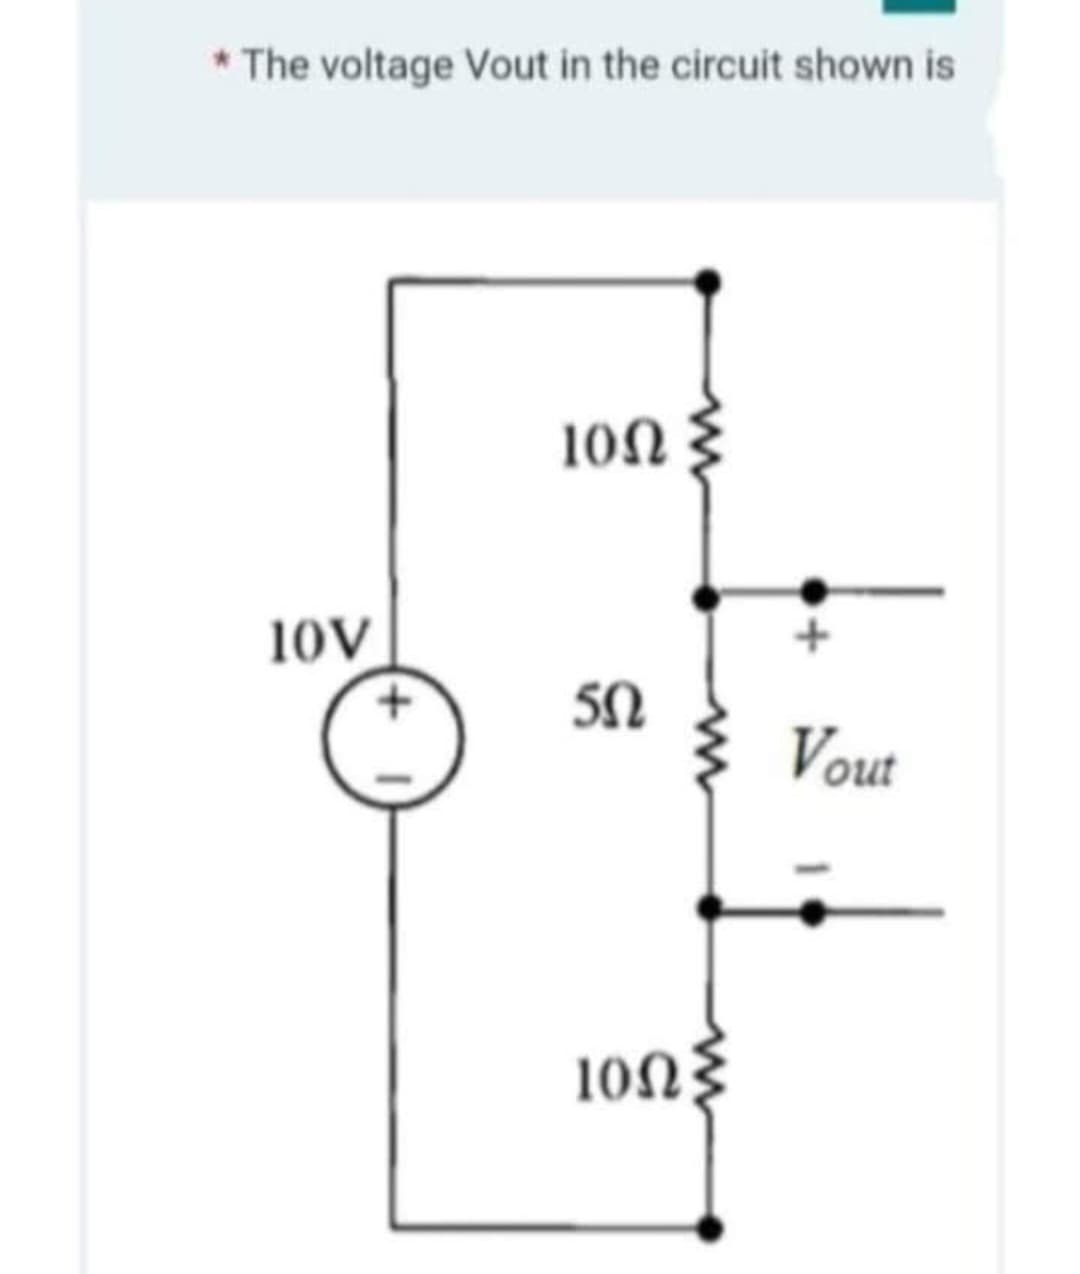 * The voltage Vout in the circuit shown is
lov
00
ទ
50
los>
Vout